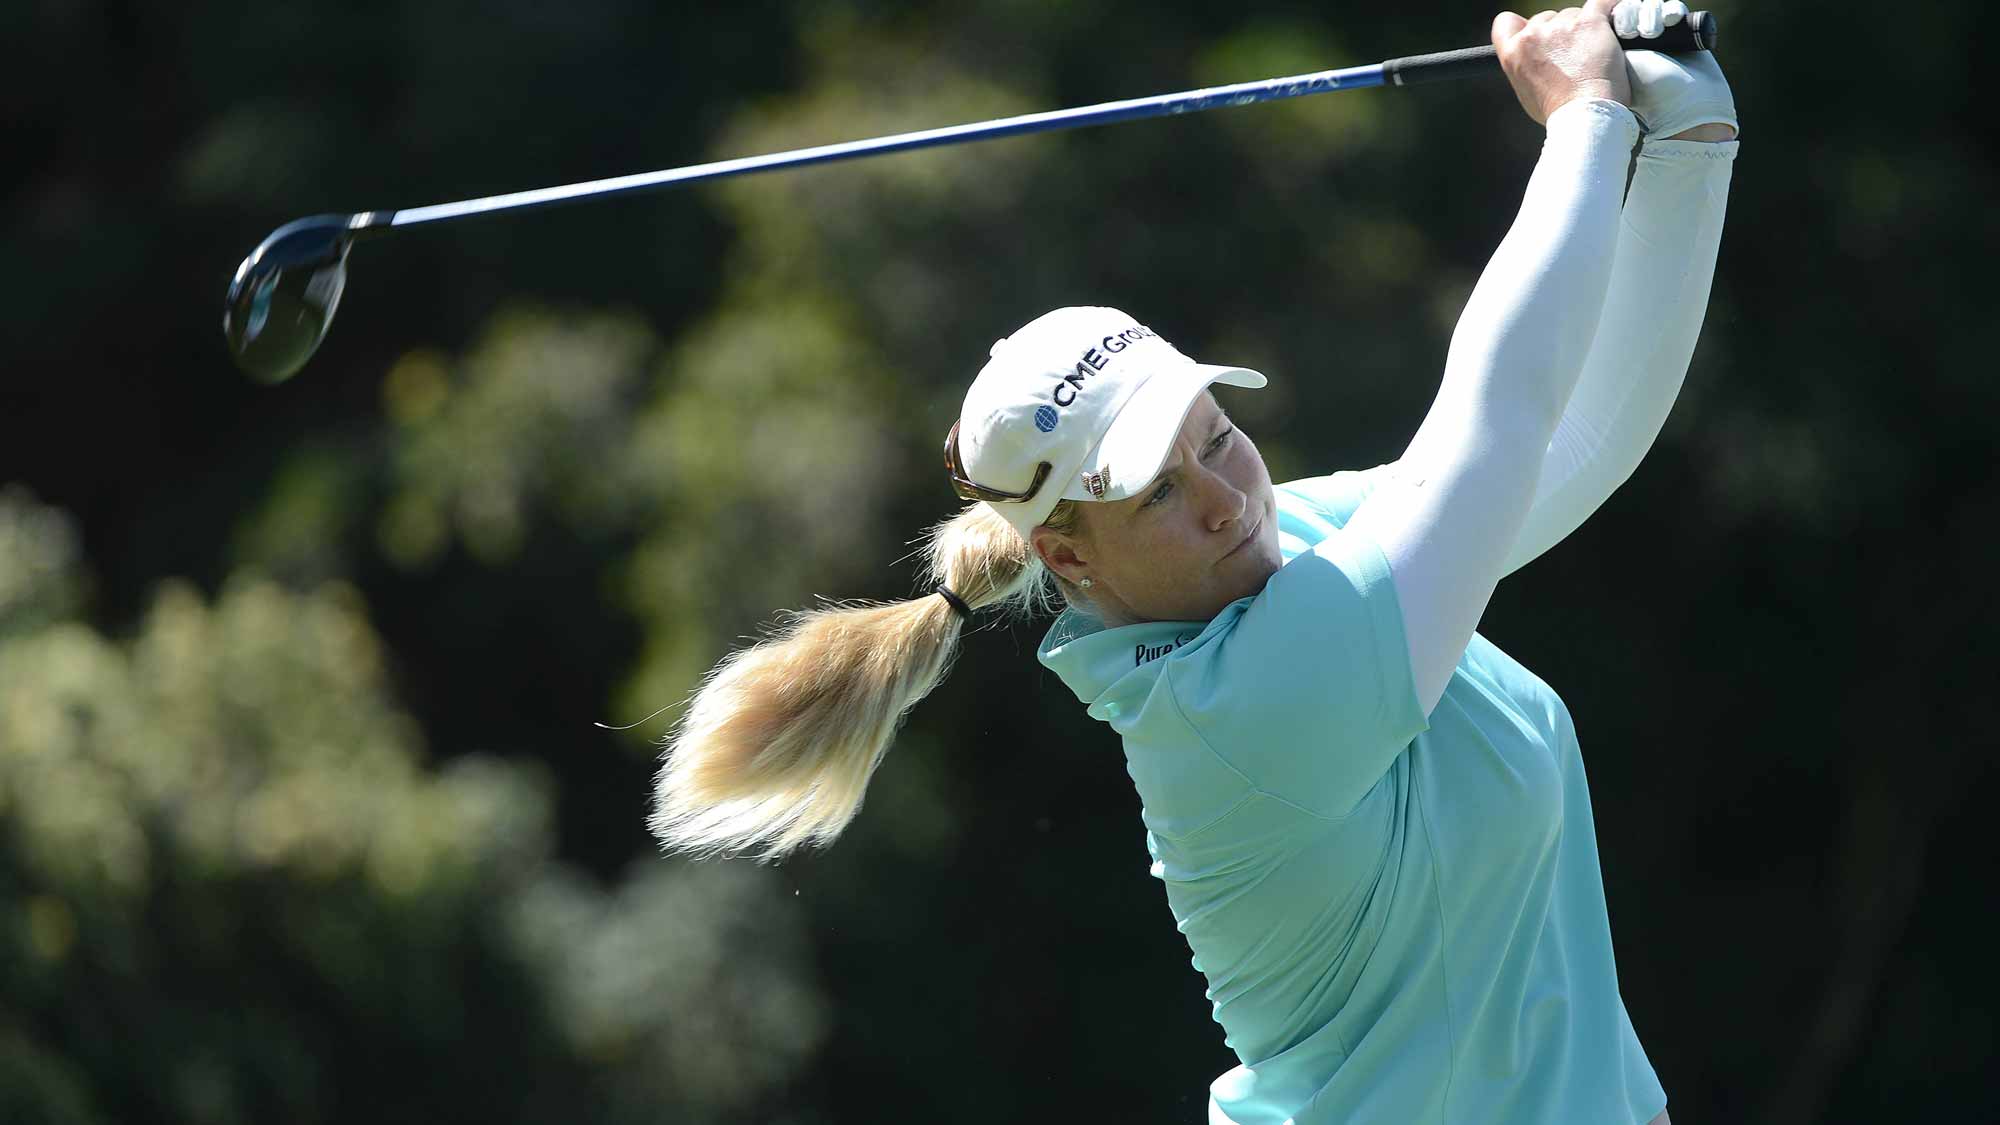 Brittany Lincicome tees off at the 2nd hole during Final Round of the LPGA KIA Classic at the Aviara Golf Club